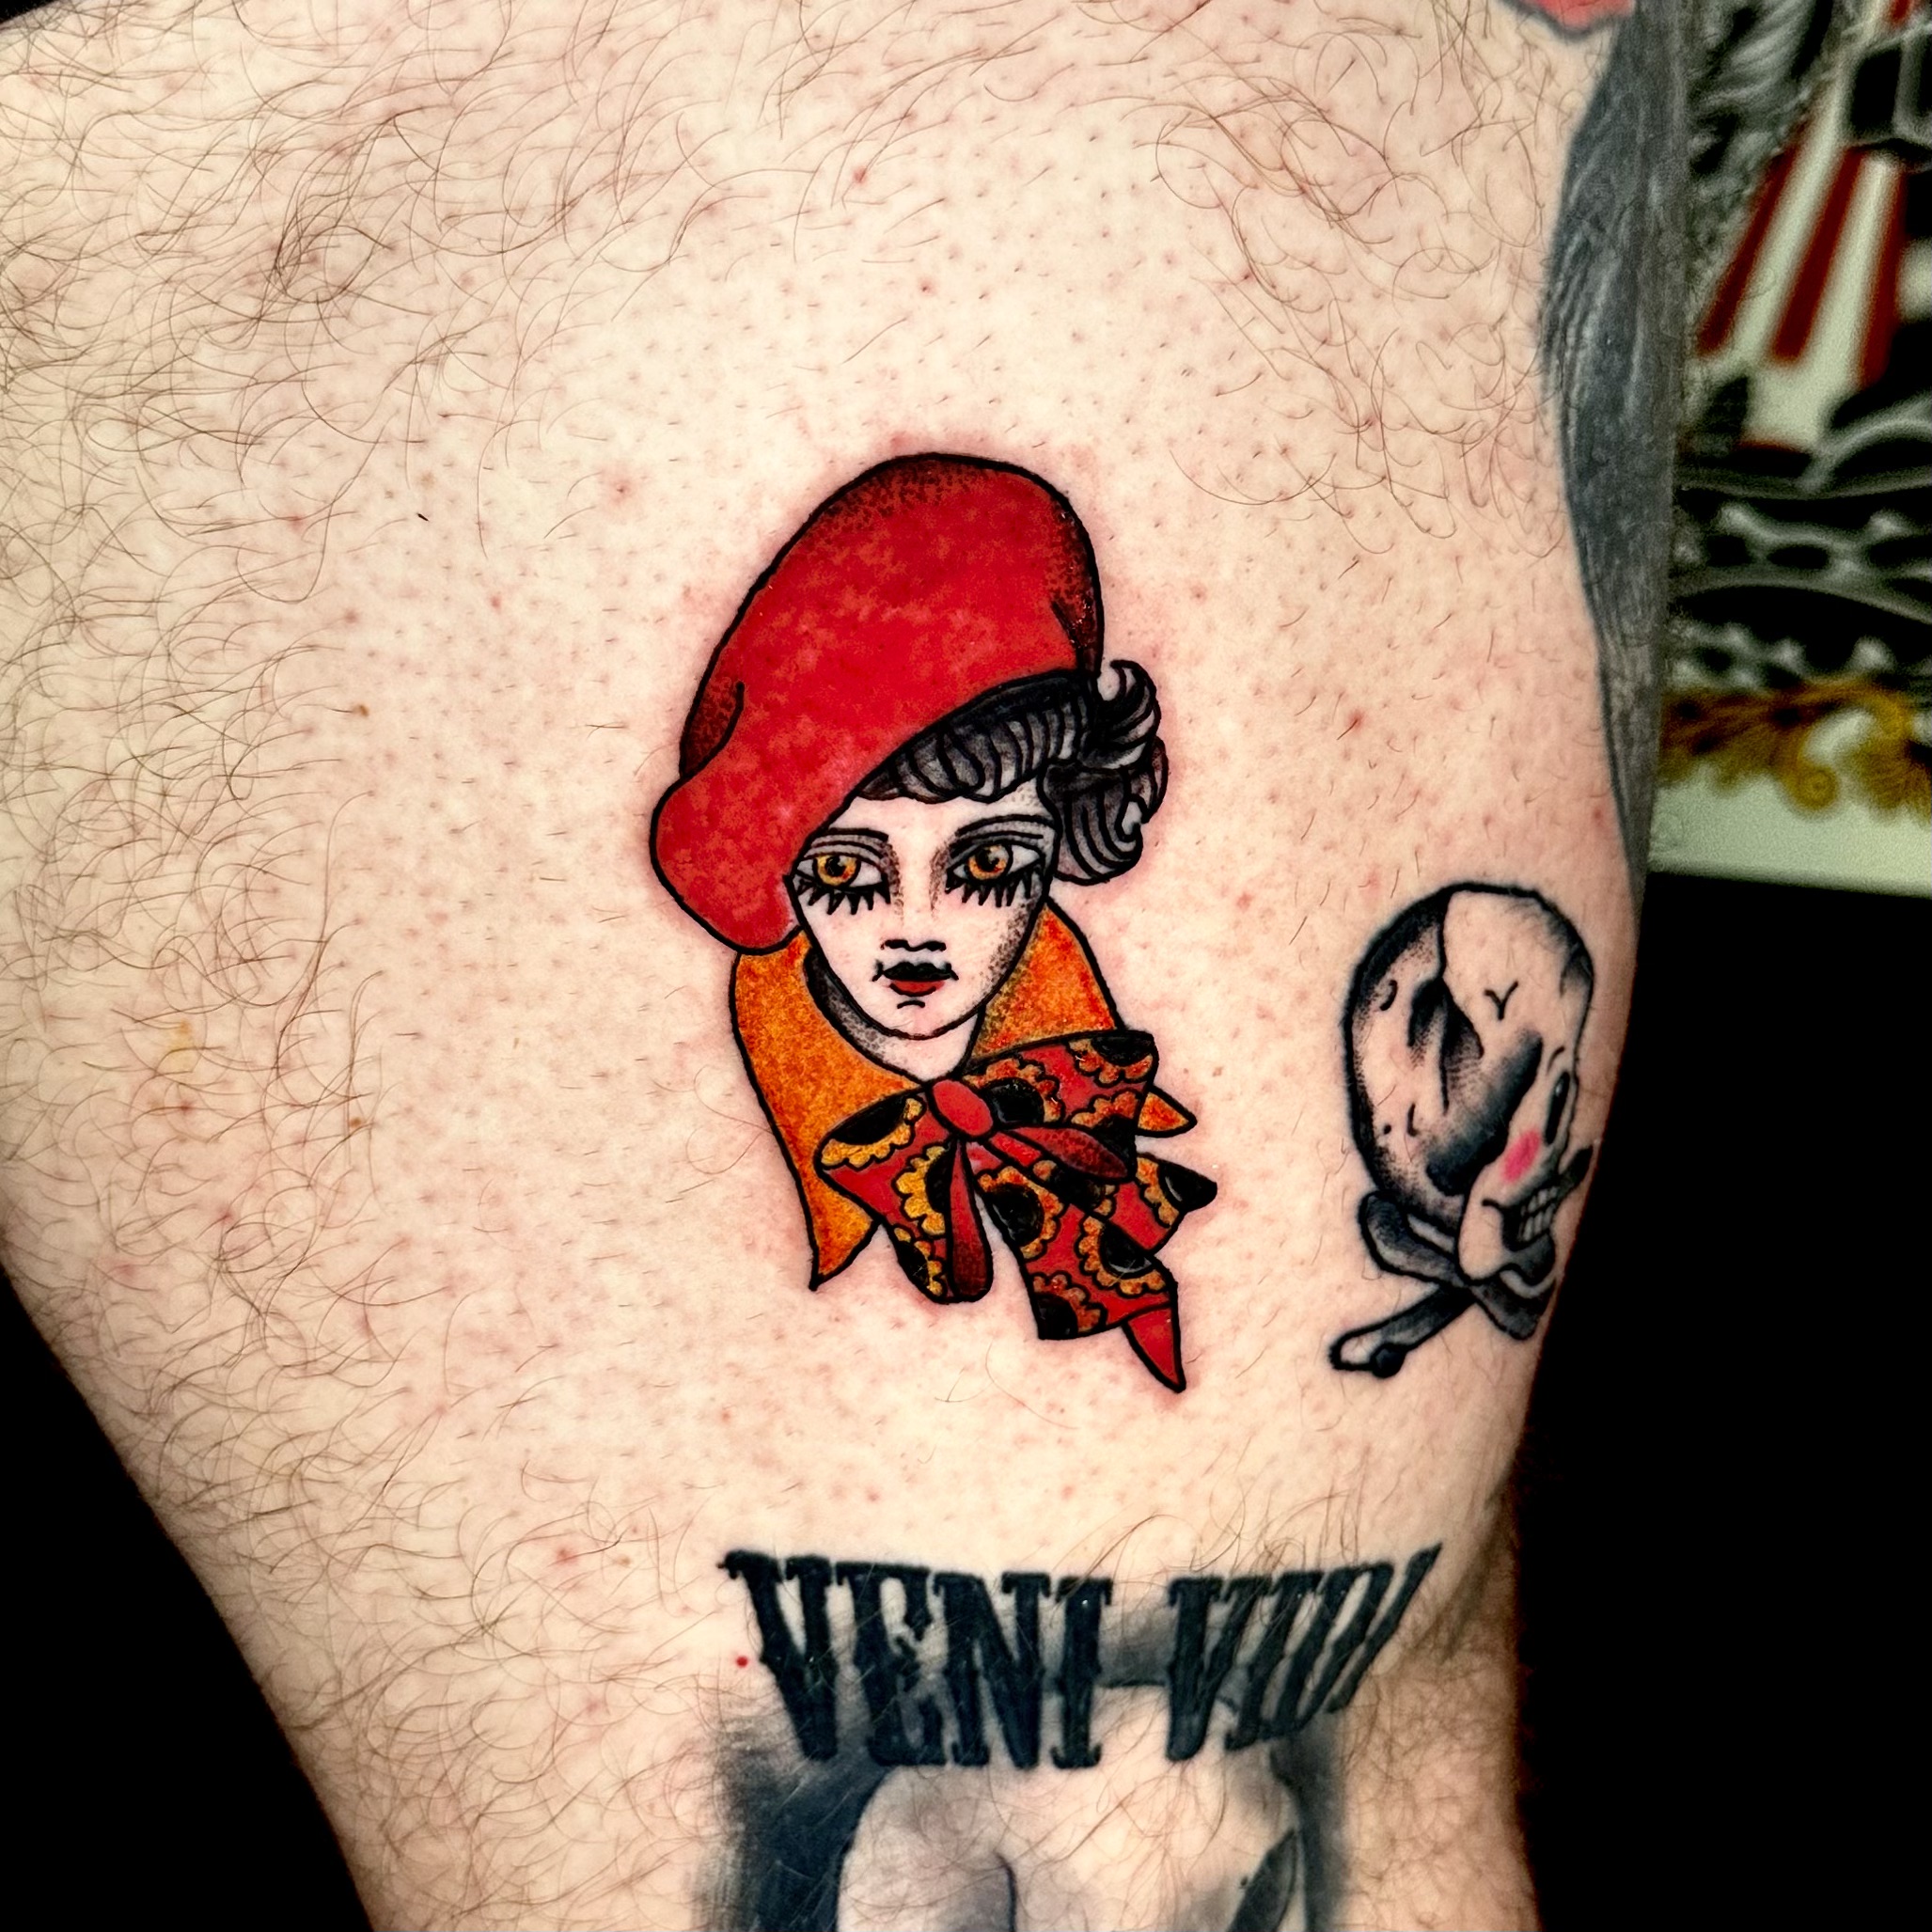 Tattoo of a woman in a red hat